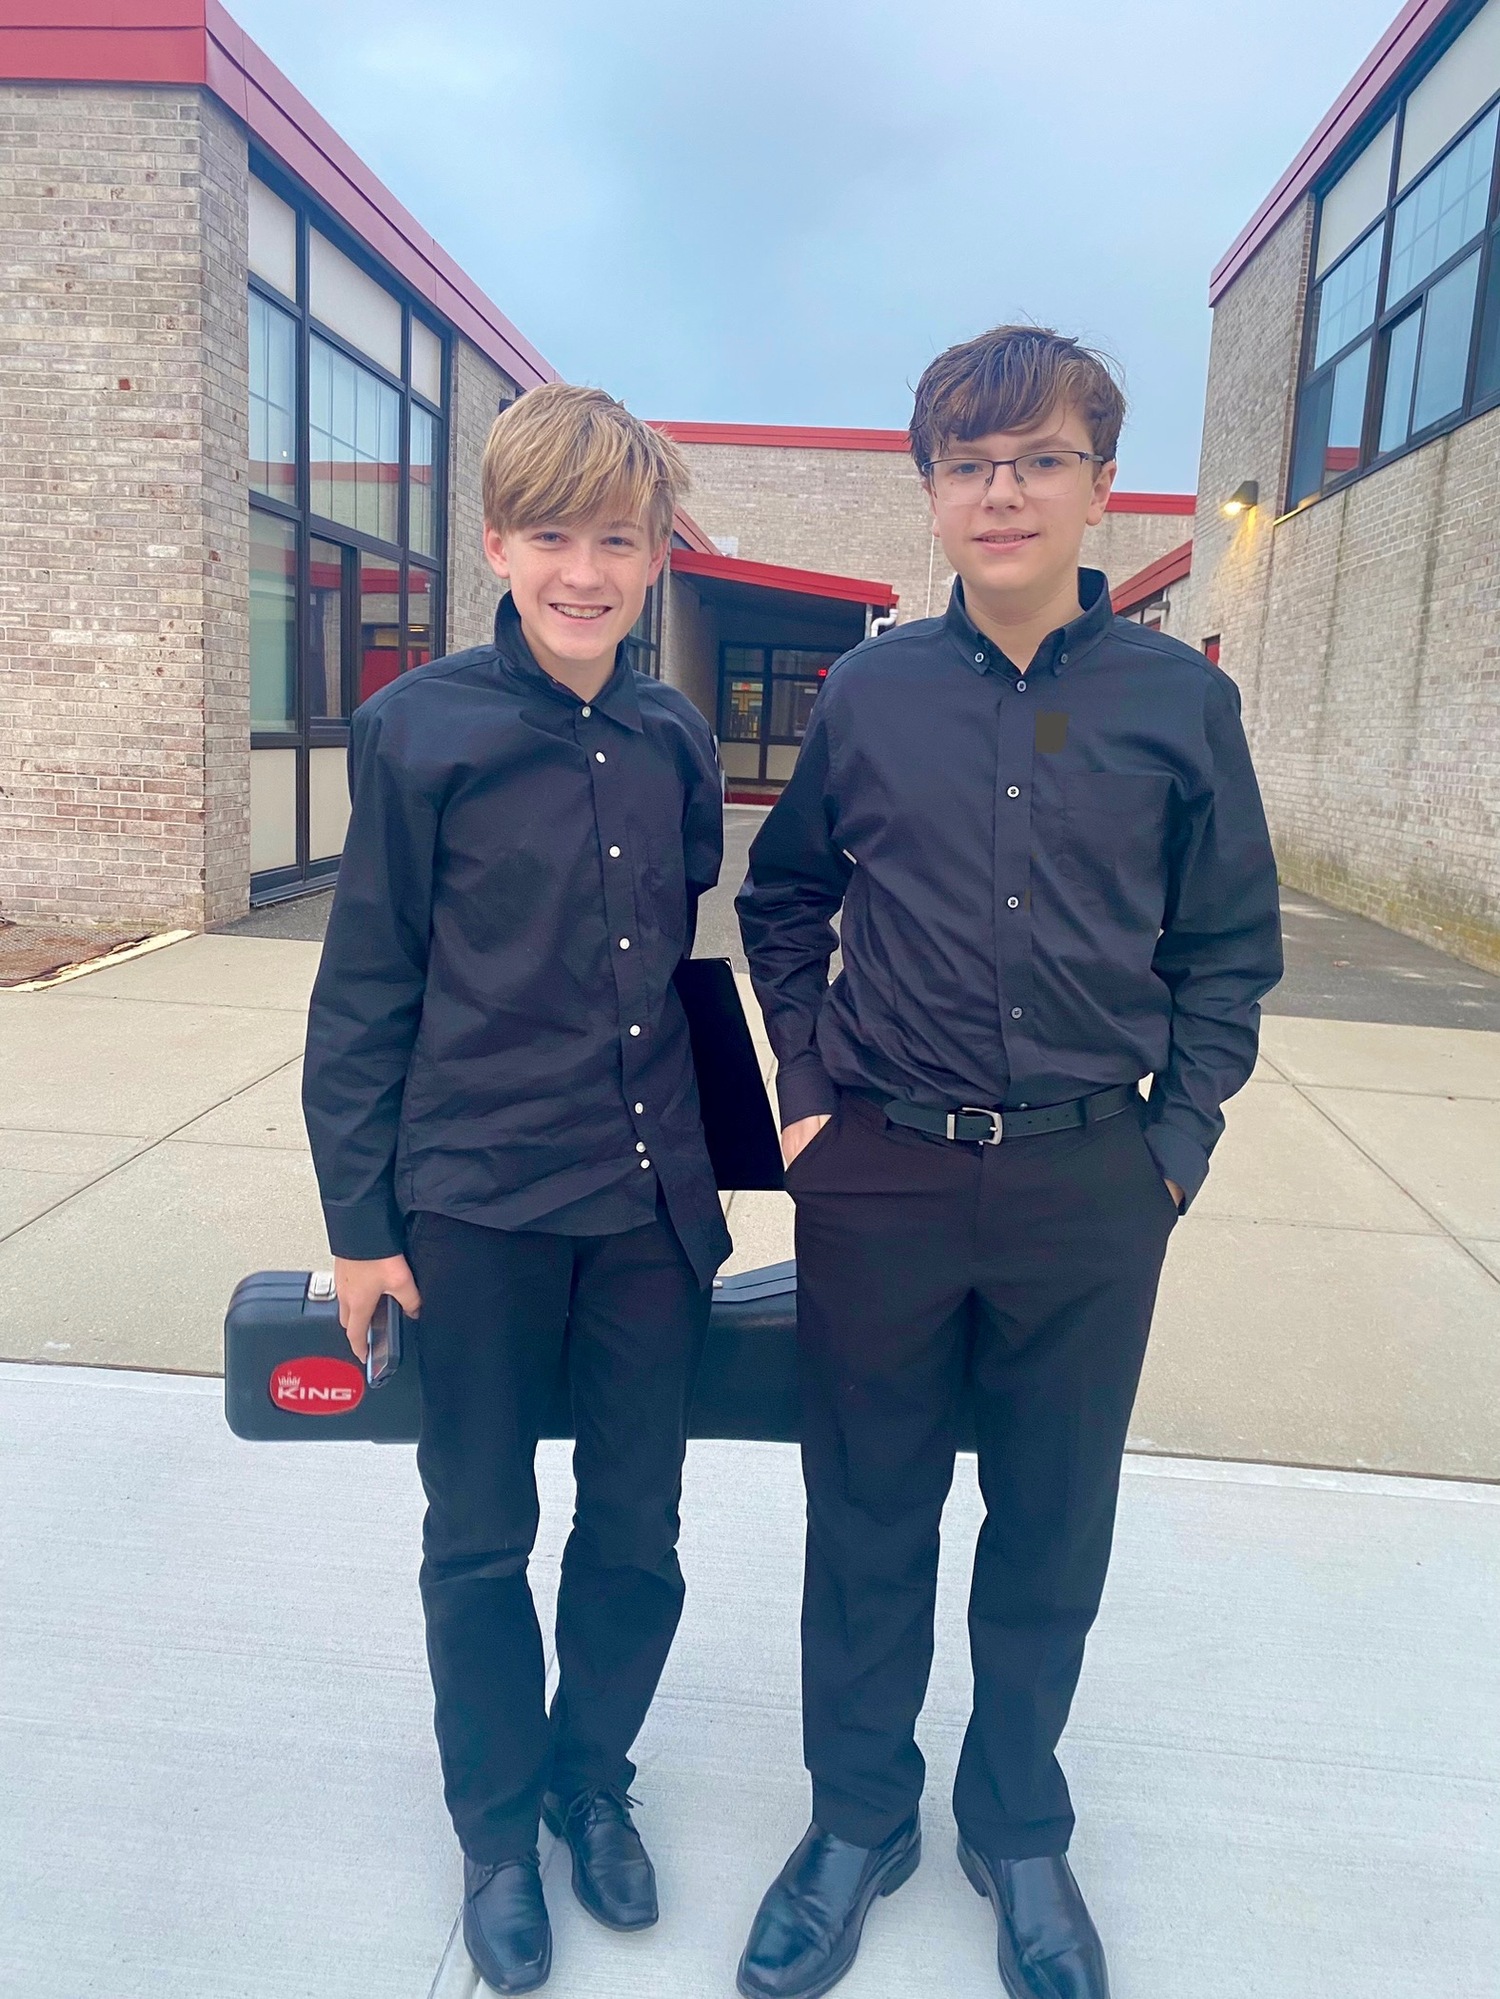 Eastport-South Manor Jr-Sr. High School student-musicians Kyler Albert and Jack Gallagher represented the Eastport-South Manor Central School District at the SCMEA All-County Jazz Concert on November 4. John Schroeder, not in the photo, was also selected for the honor. COURTESY EASTPORT-SOUTH MANOR SCHOOL DISTRICT